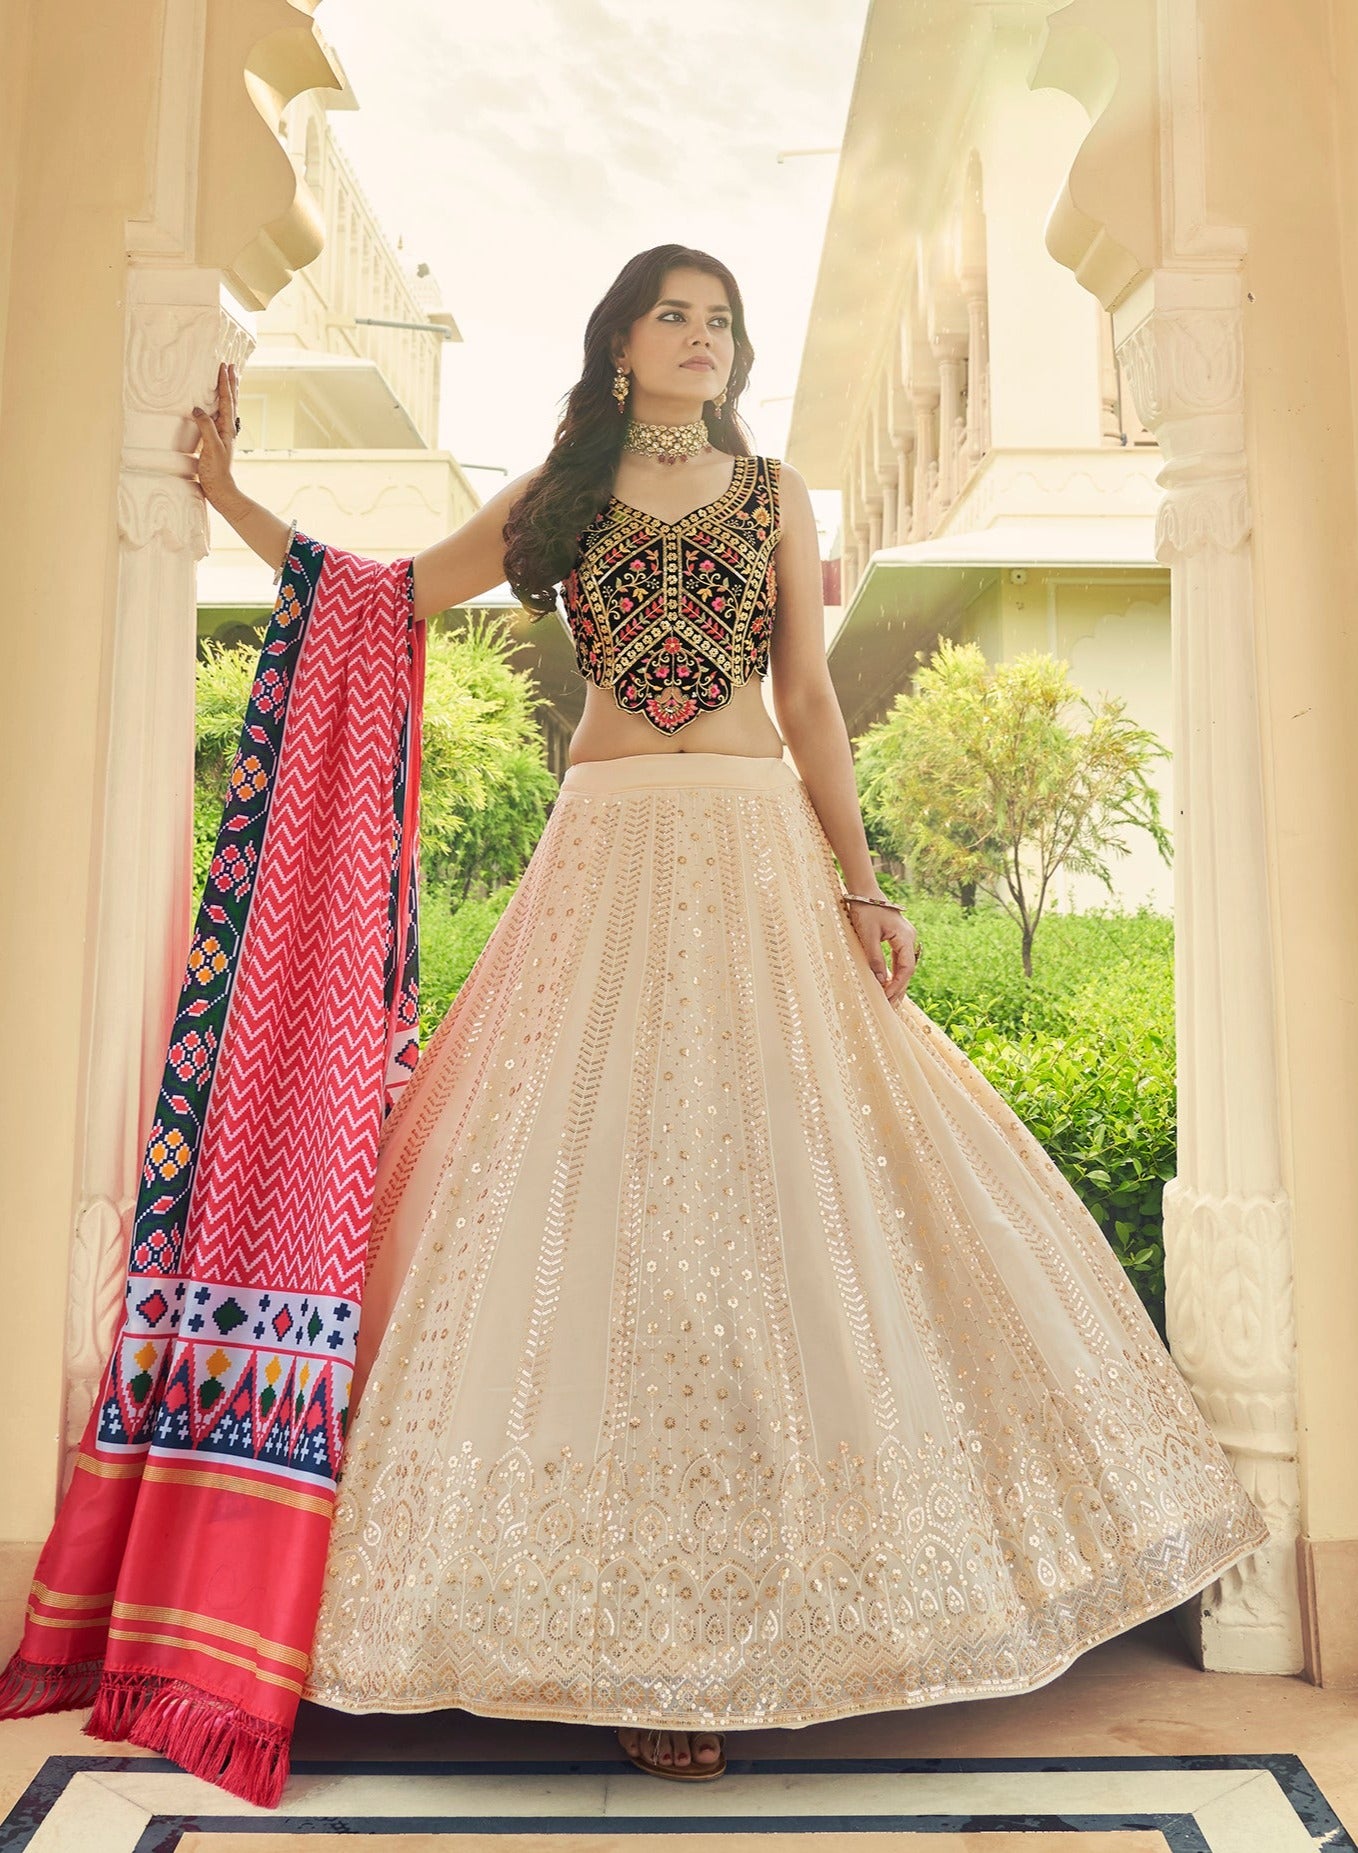 How to Achieve a Flawless Lehenga Choli Look with Makeup and Hair